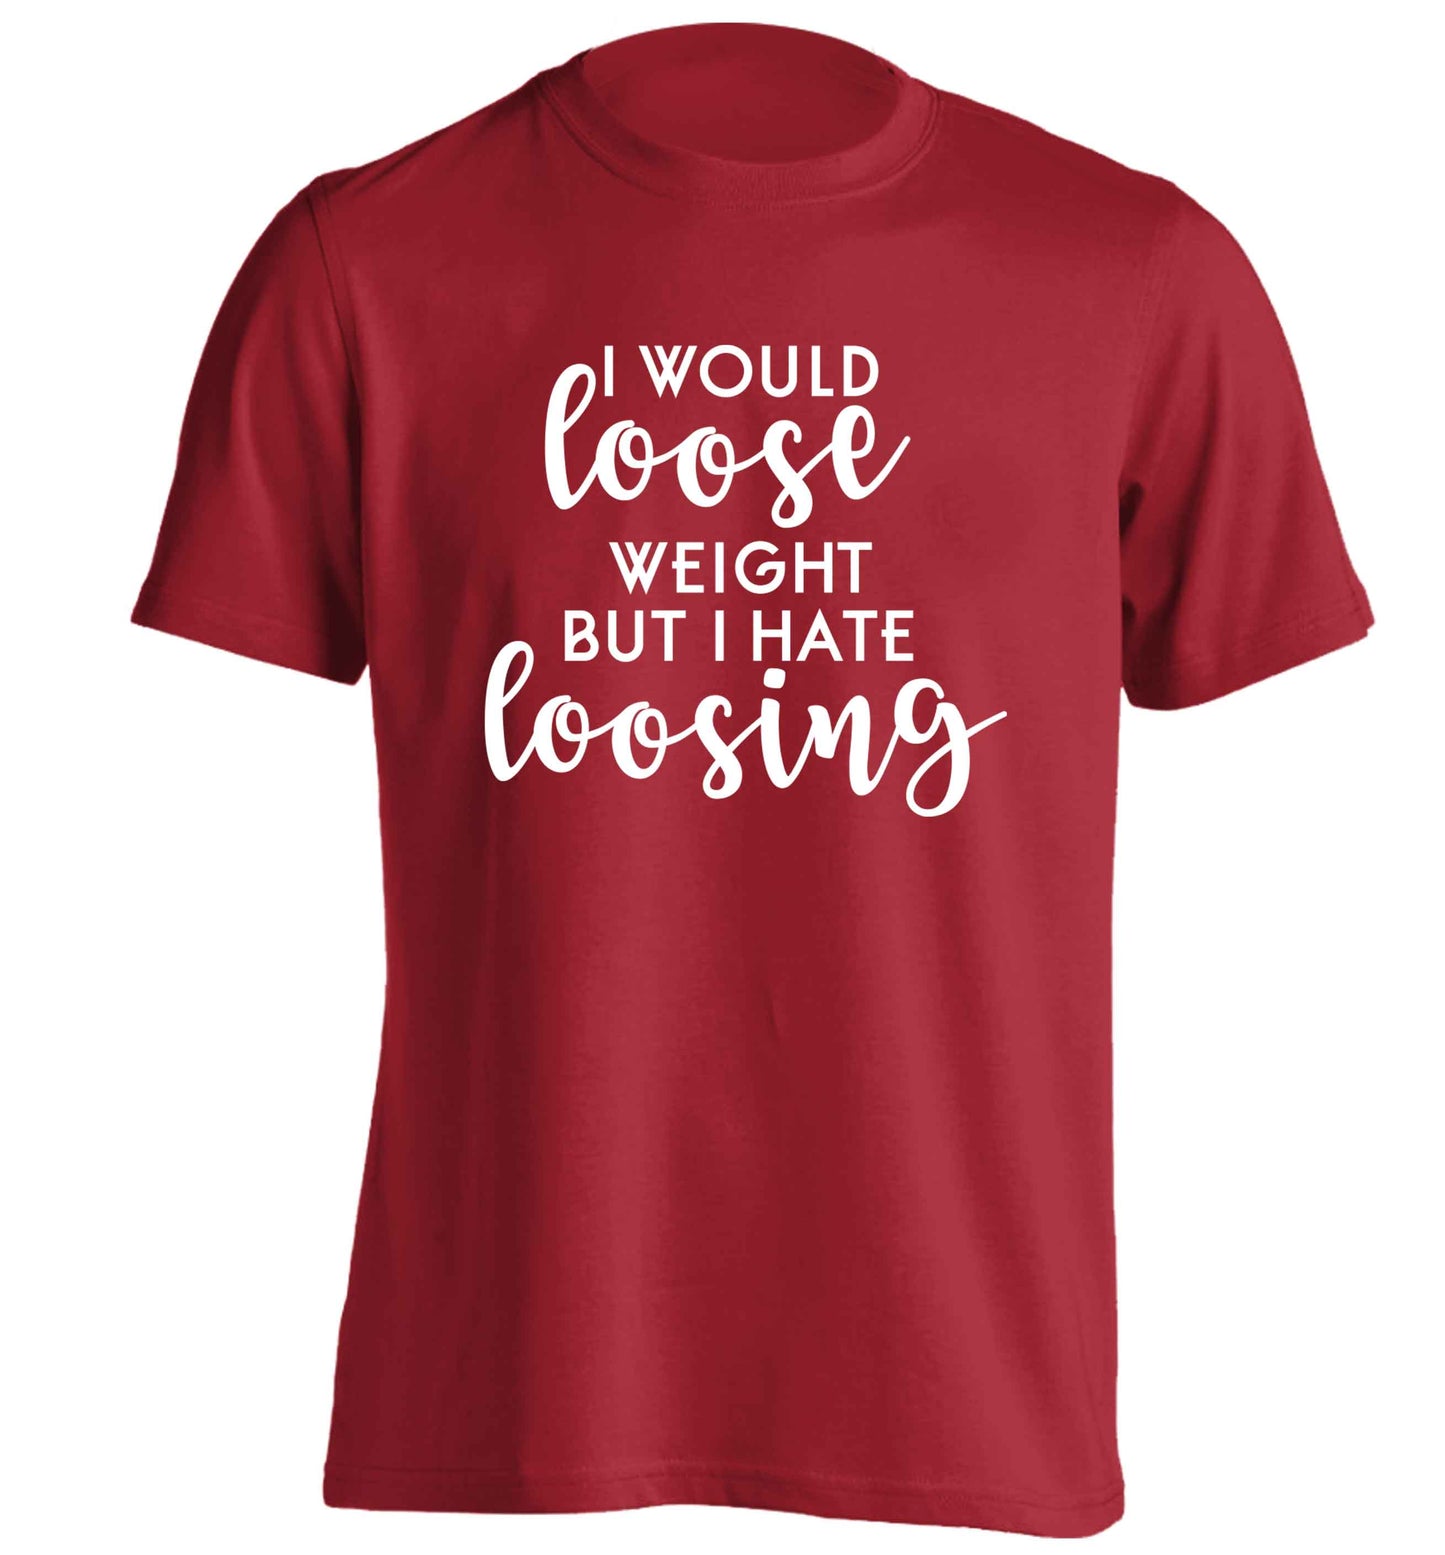 I would loose weight but I hate loosing adults unisex red Tshirt 2XL